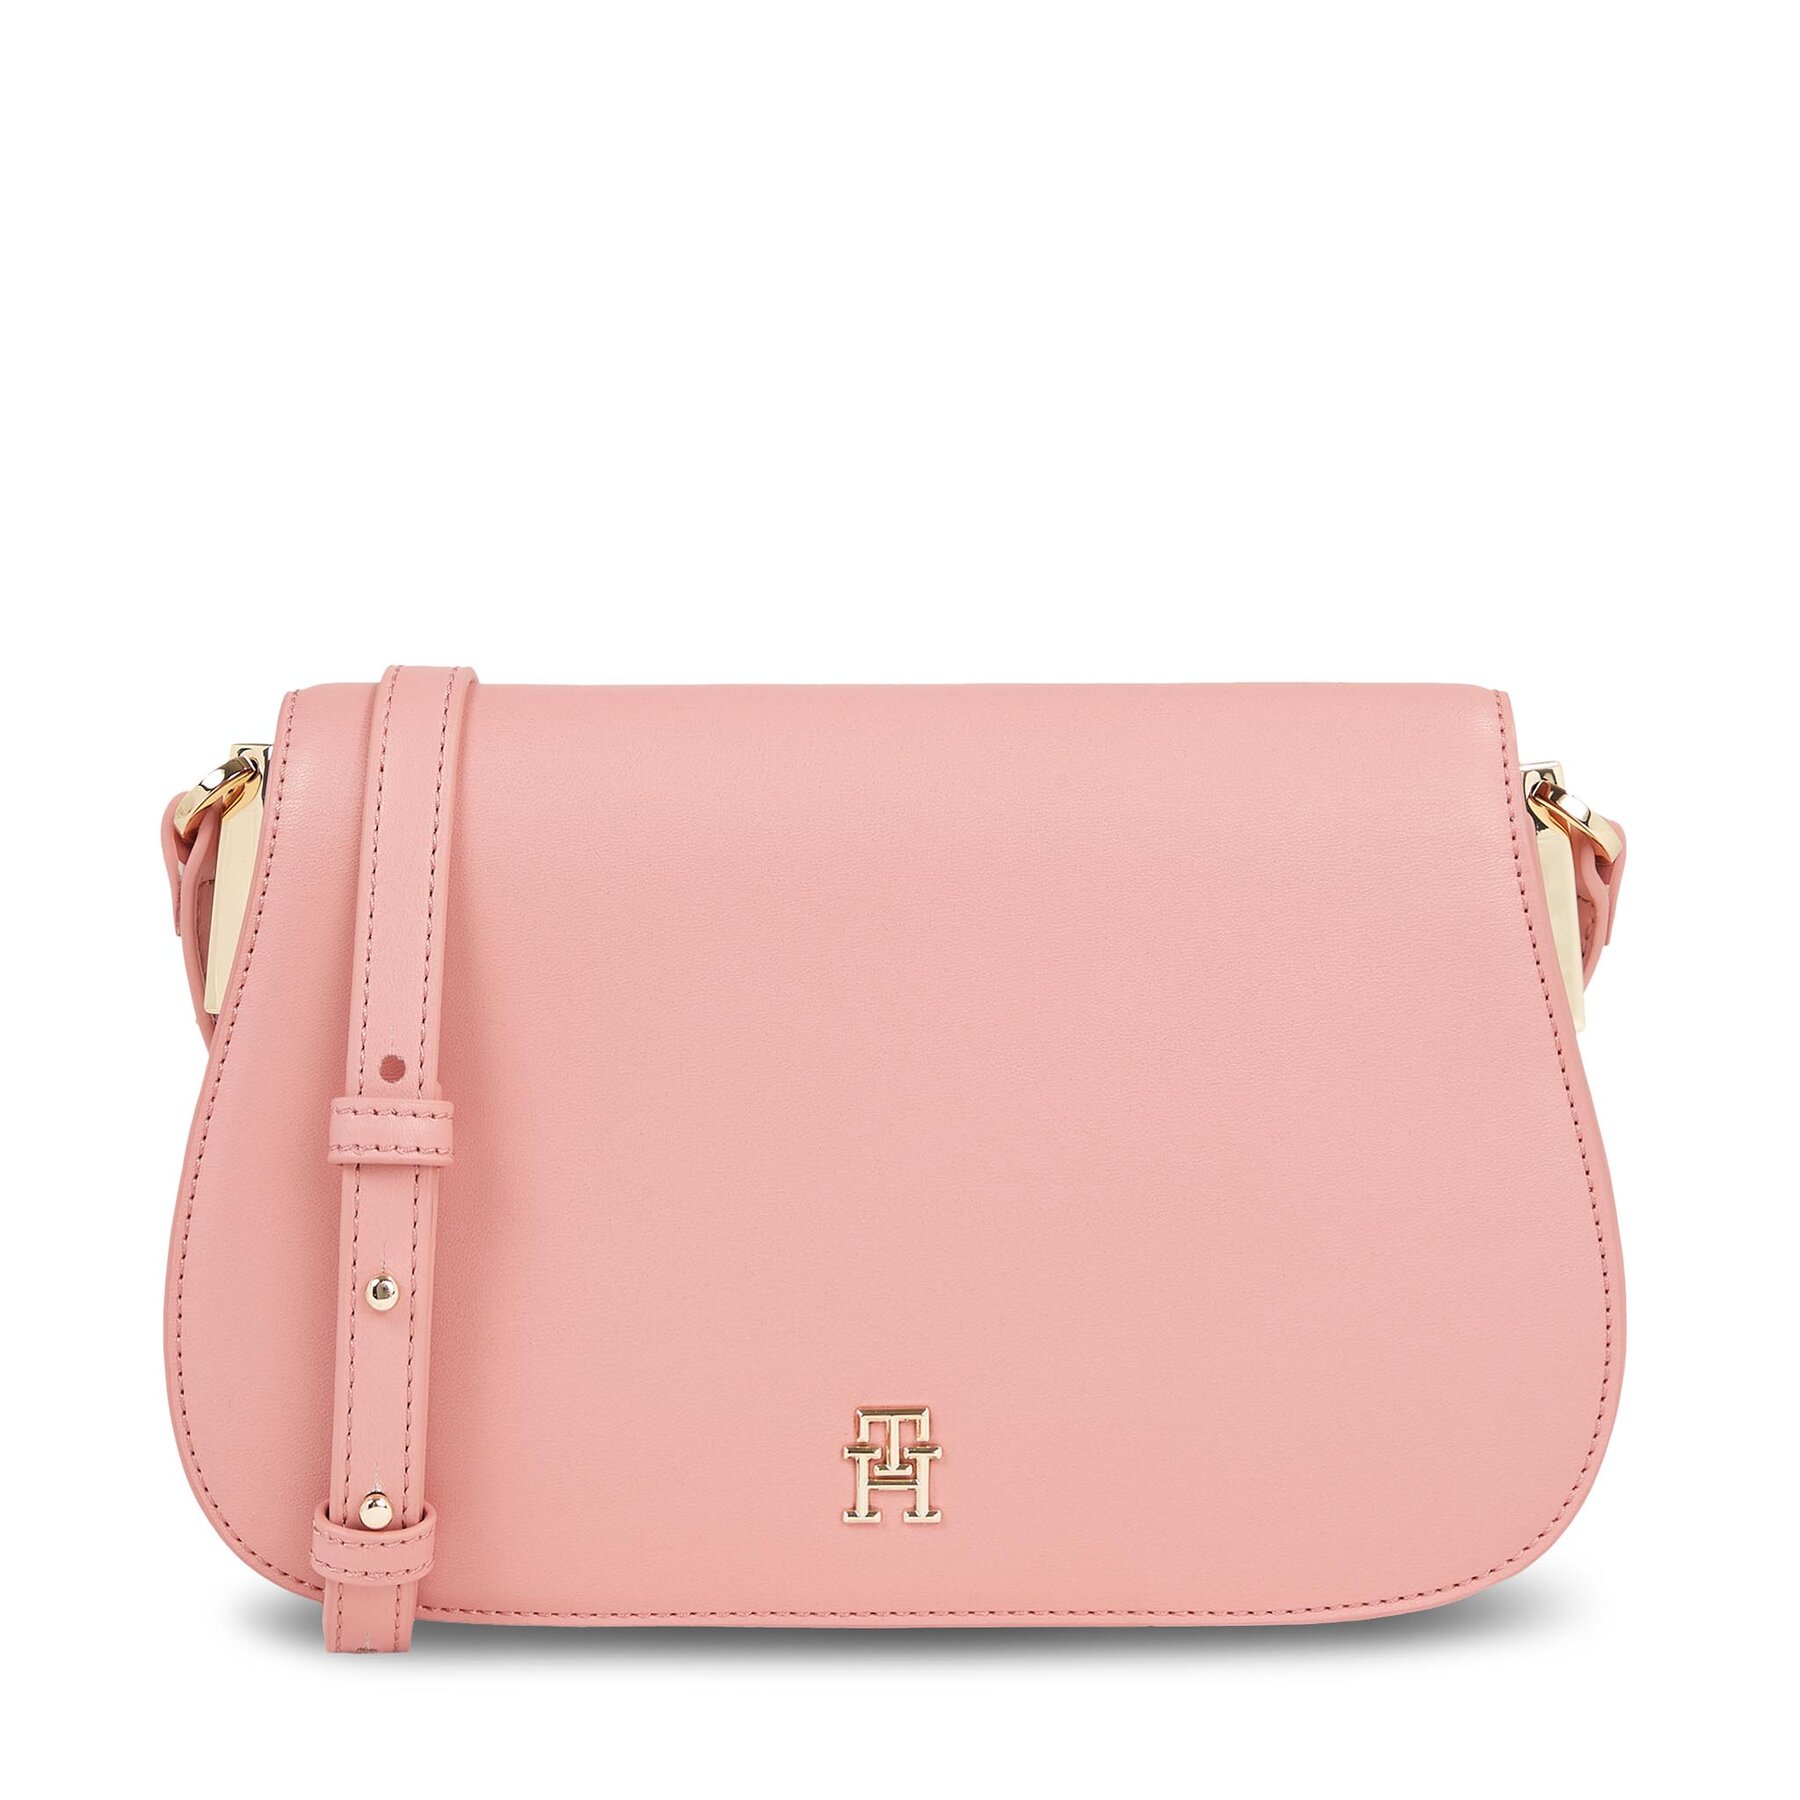 Handtasche Tommy Hilfiger Th Spring Chic Flap Crossover AW0AW15974 Teaberry Blossom TJ5 von Tommy Hilfiger